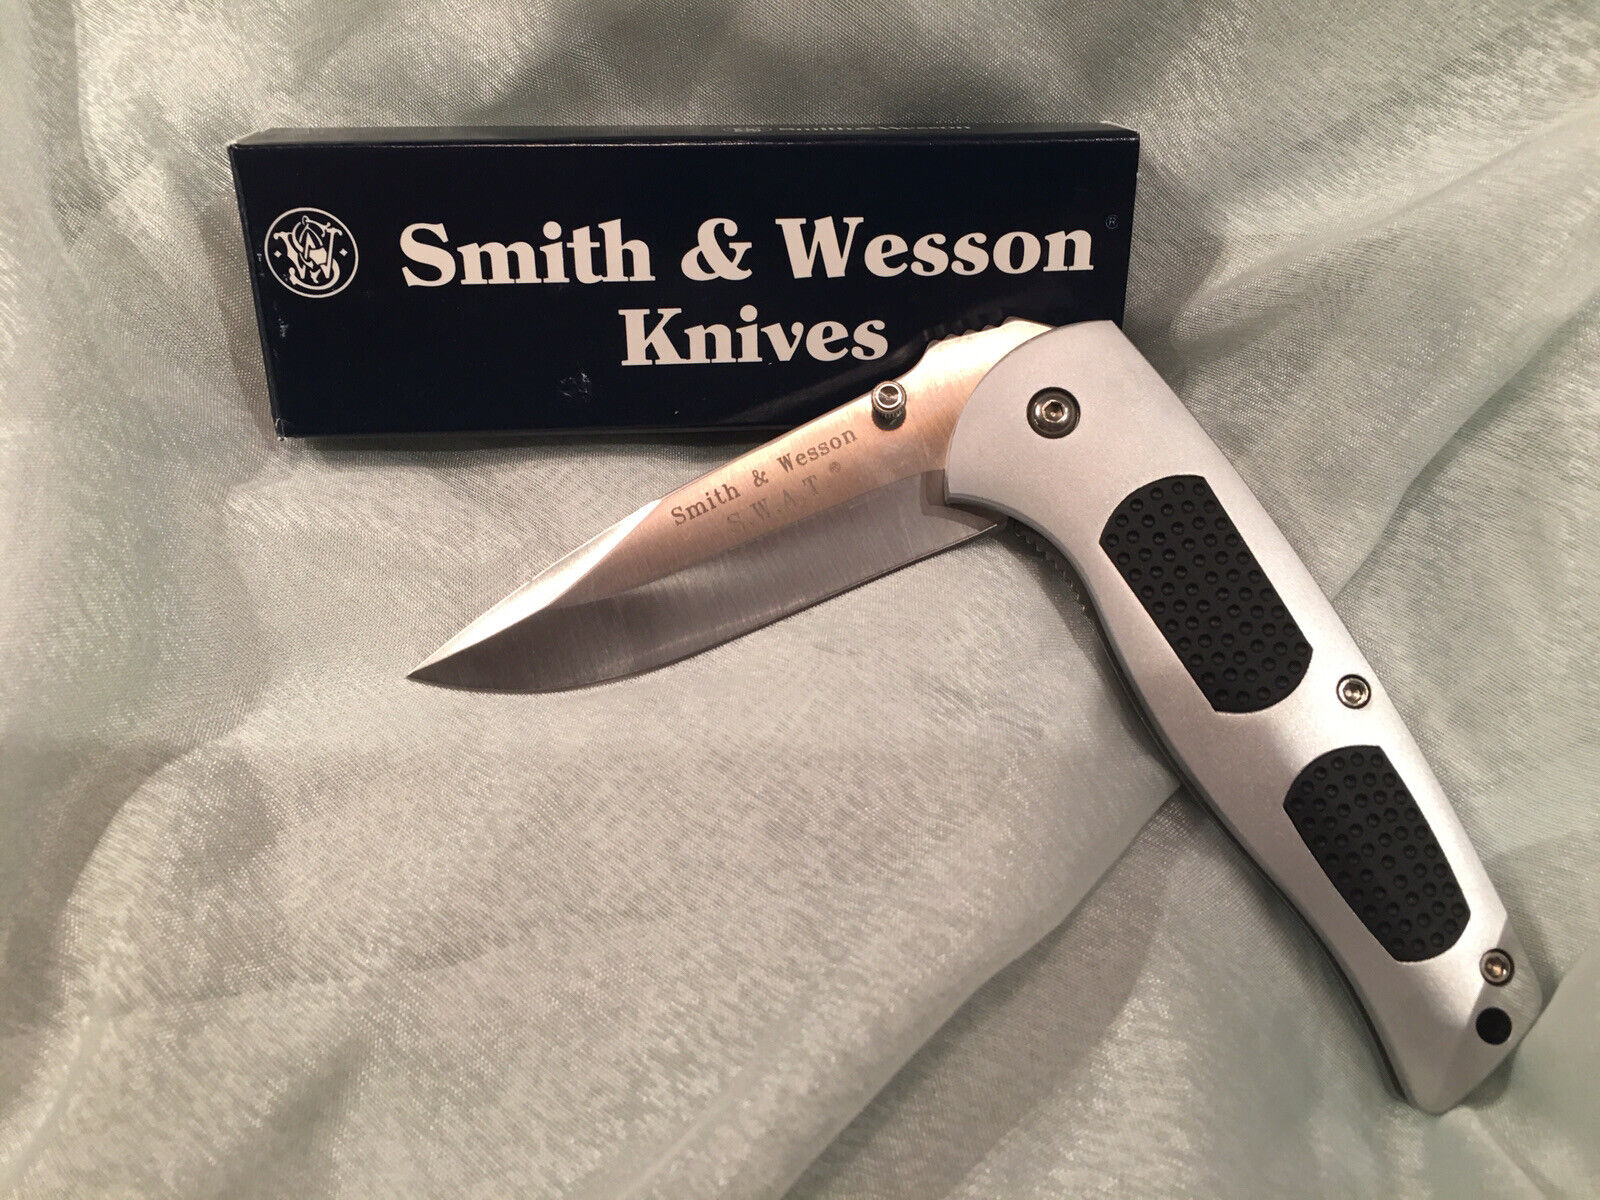 Smith & Wesson Large SWAT SW-2000 Knife - Original Design - New Old Stock